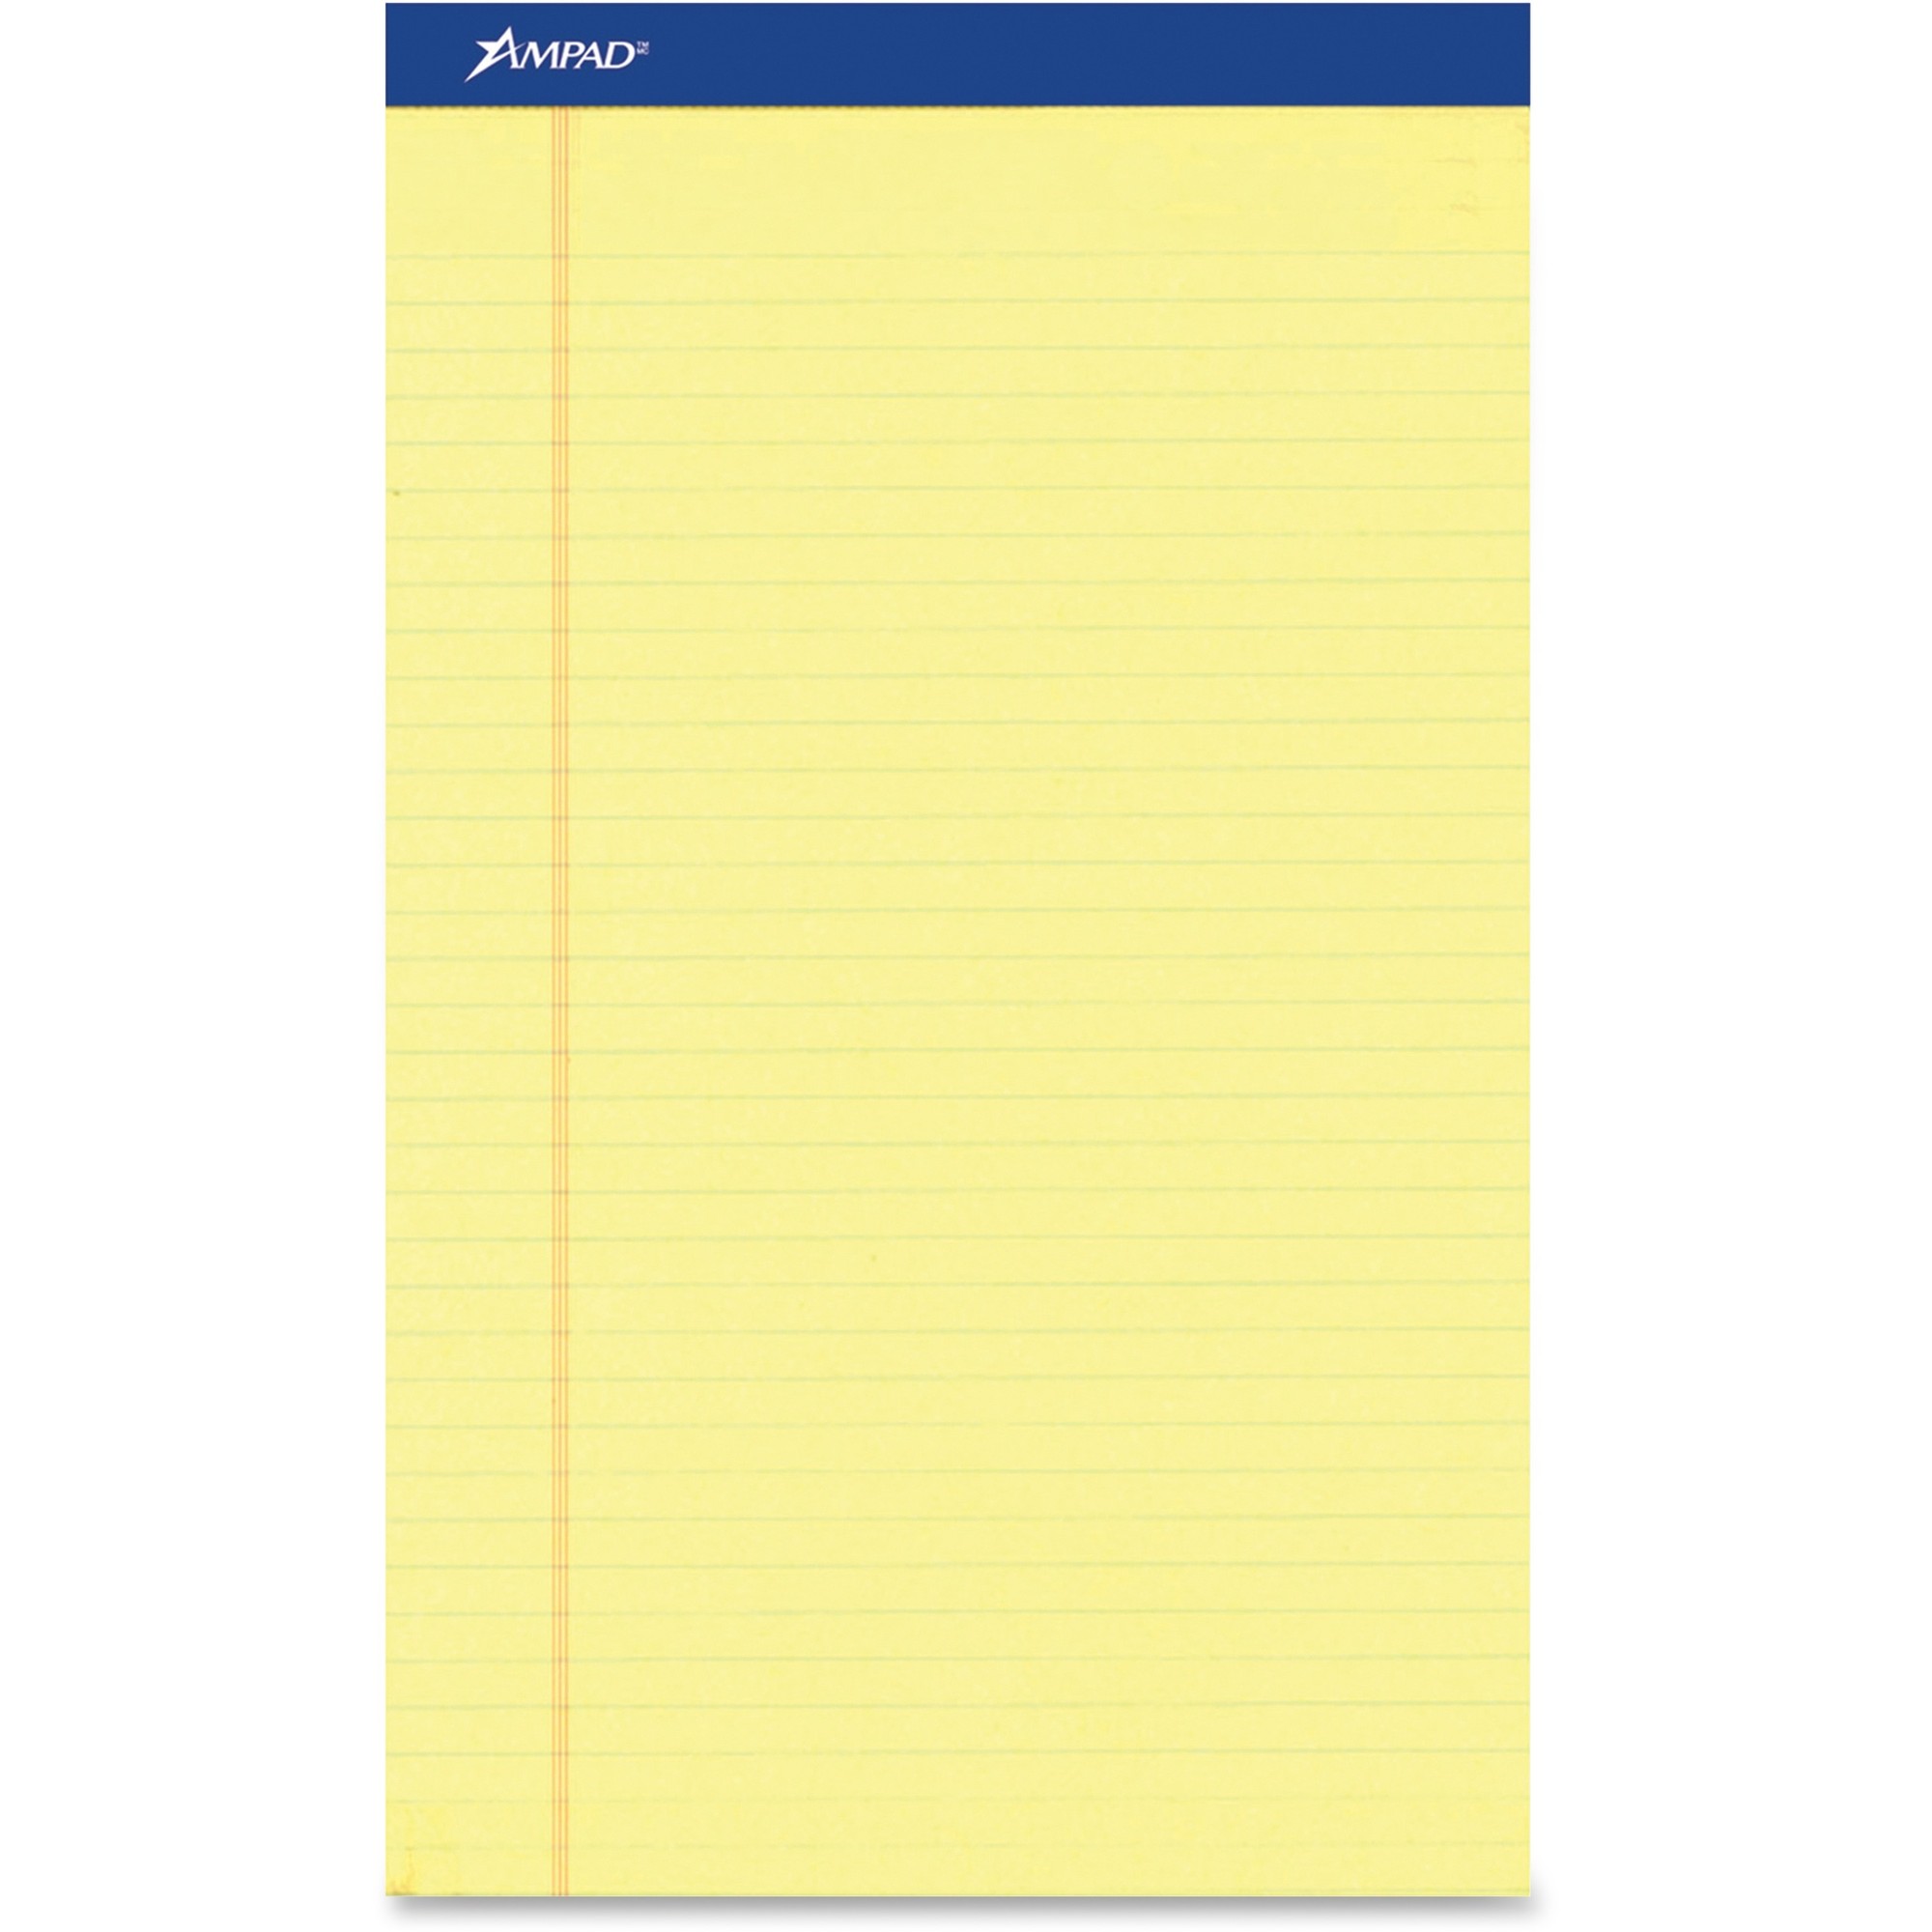 Ampad Perforated Ruled Pads - Letter - 50 Sheets - Stapled - 0.34" Ruled - Letter - 8 1/2" x 11"8.5" x 11.8" - Dark Blue Binder 